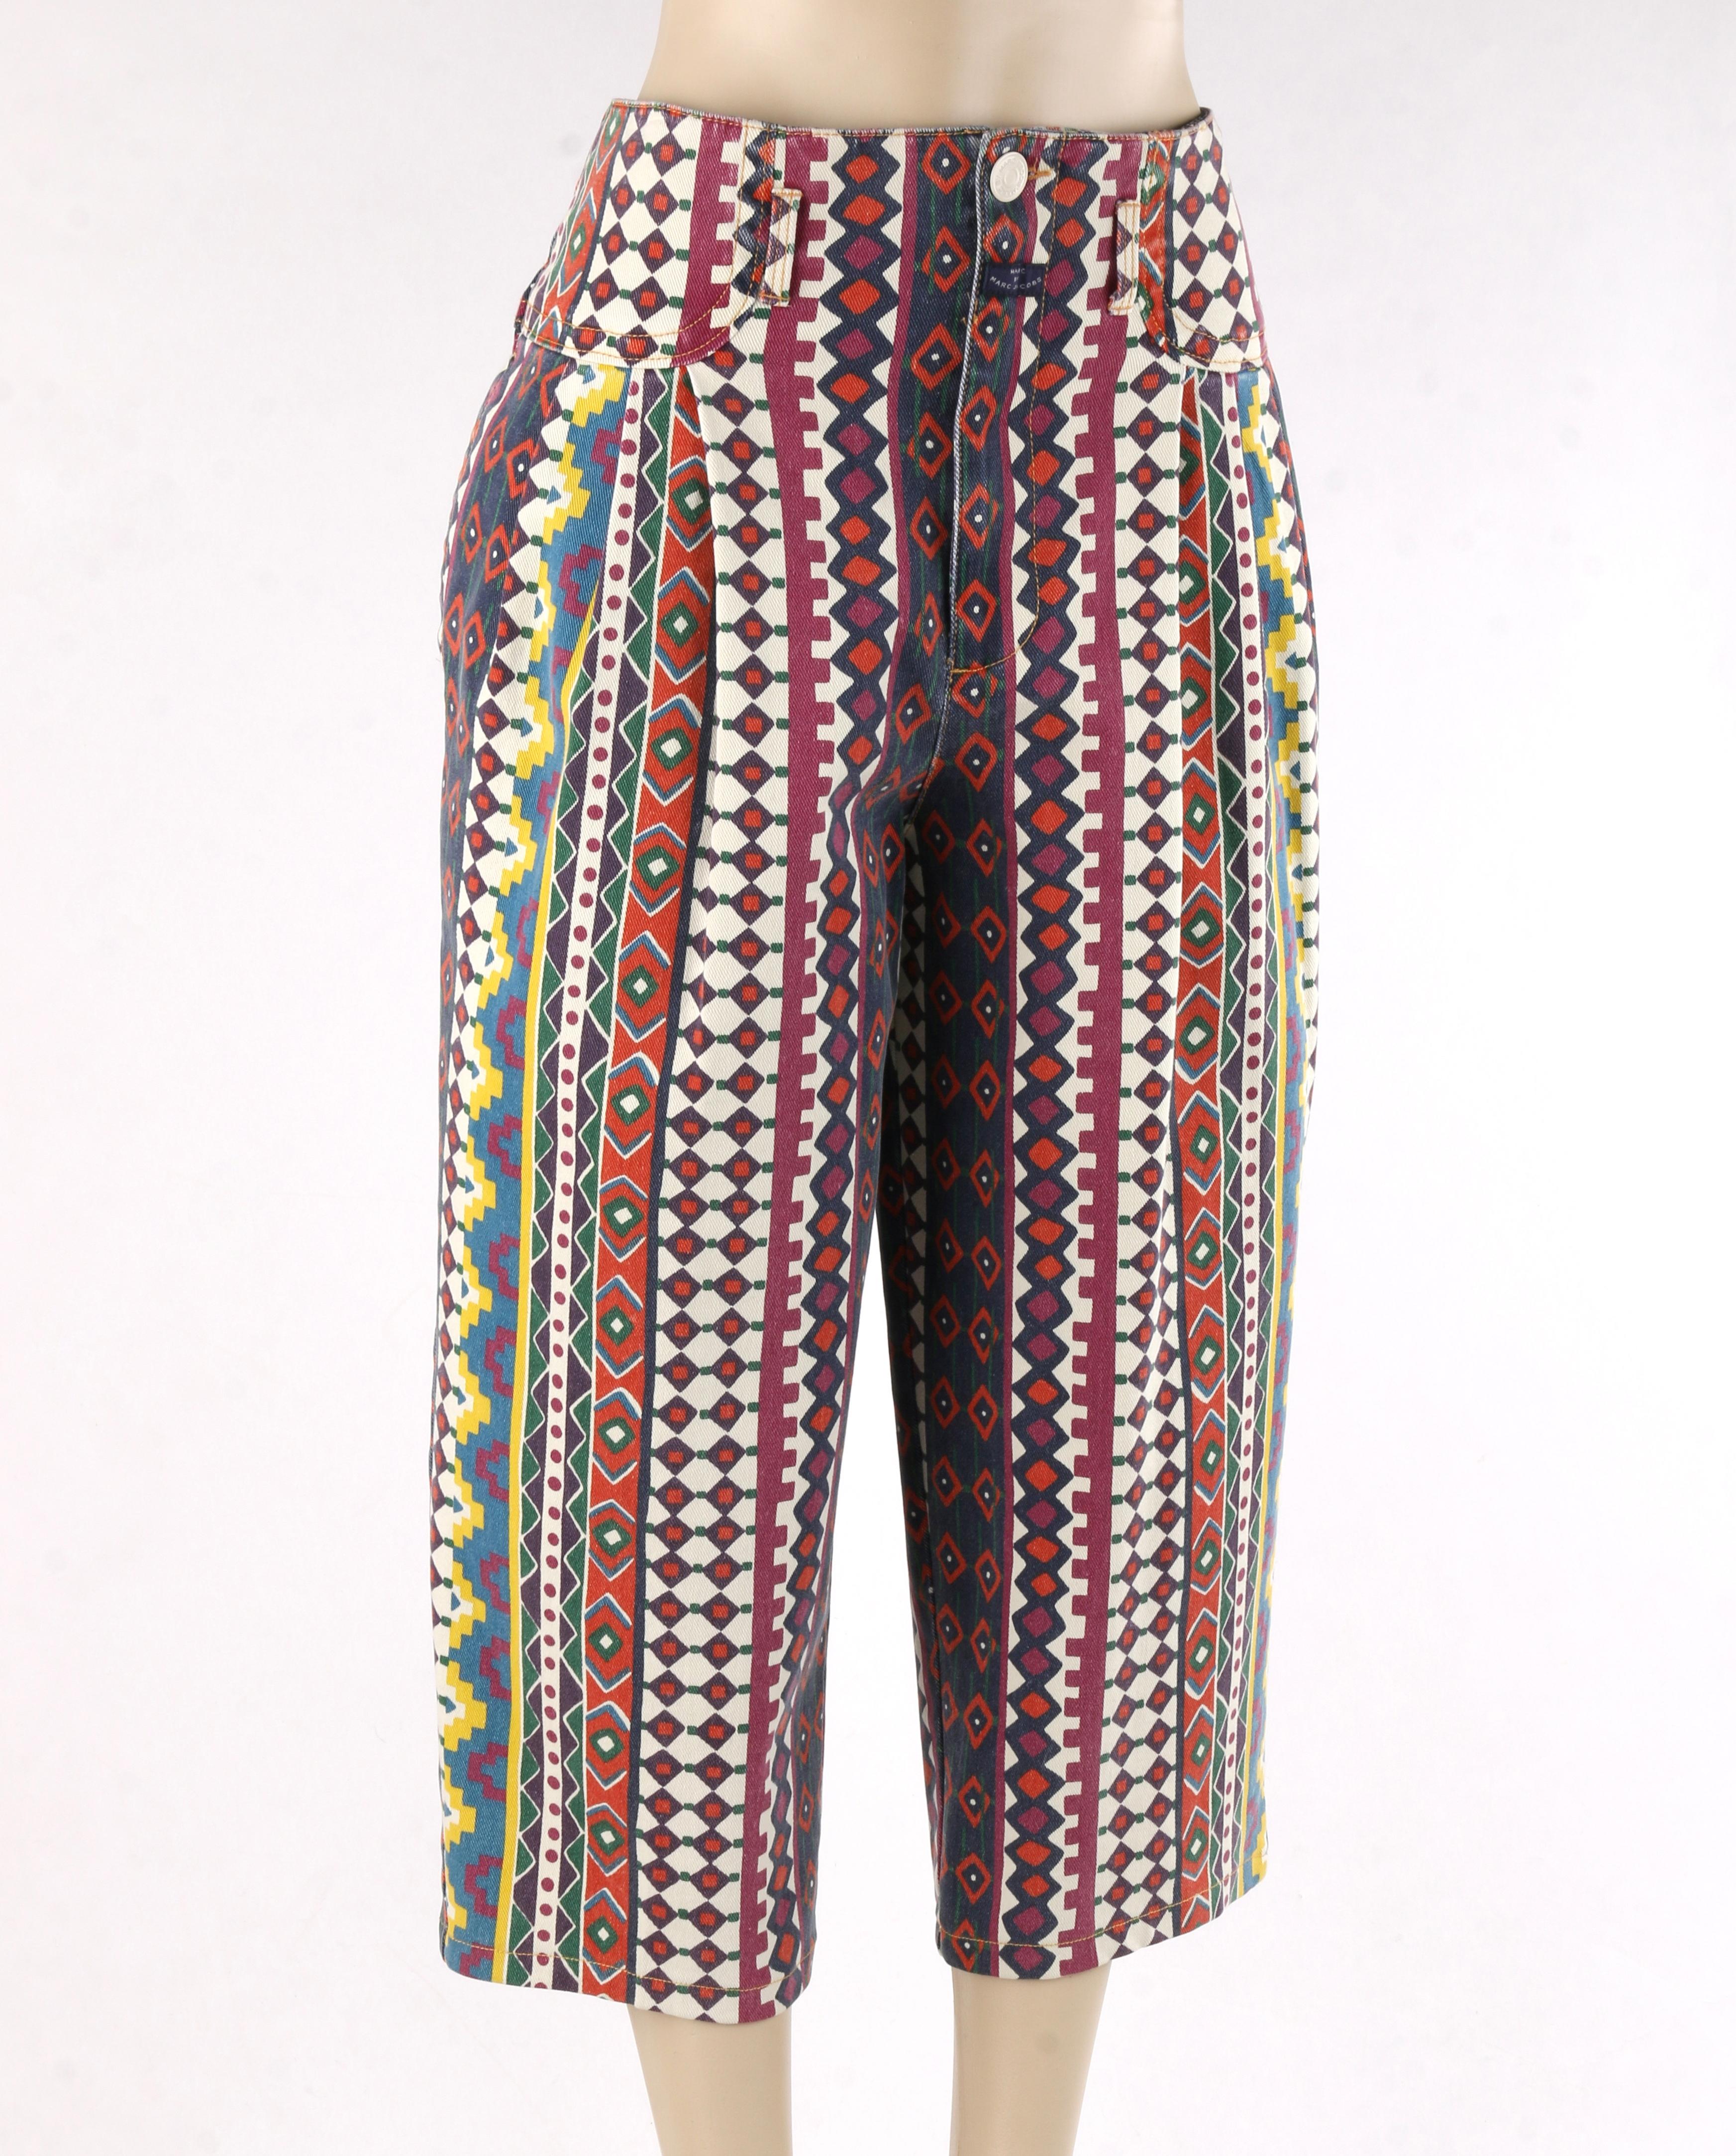 MARC JACOBS S/S 2010 Runway Burgeoning Tribal Printed Denim Crop Pant 
 
Brand / Manufacturer: Marc By Marc Jacobs
Collection: S/S 2010; runway look #9
Style: Clam digger pant
Color(s): Shades of red, yellow, green, blue, purple and white. 
Lined: